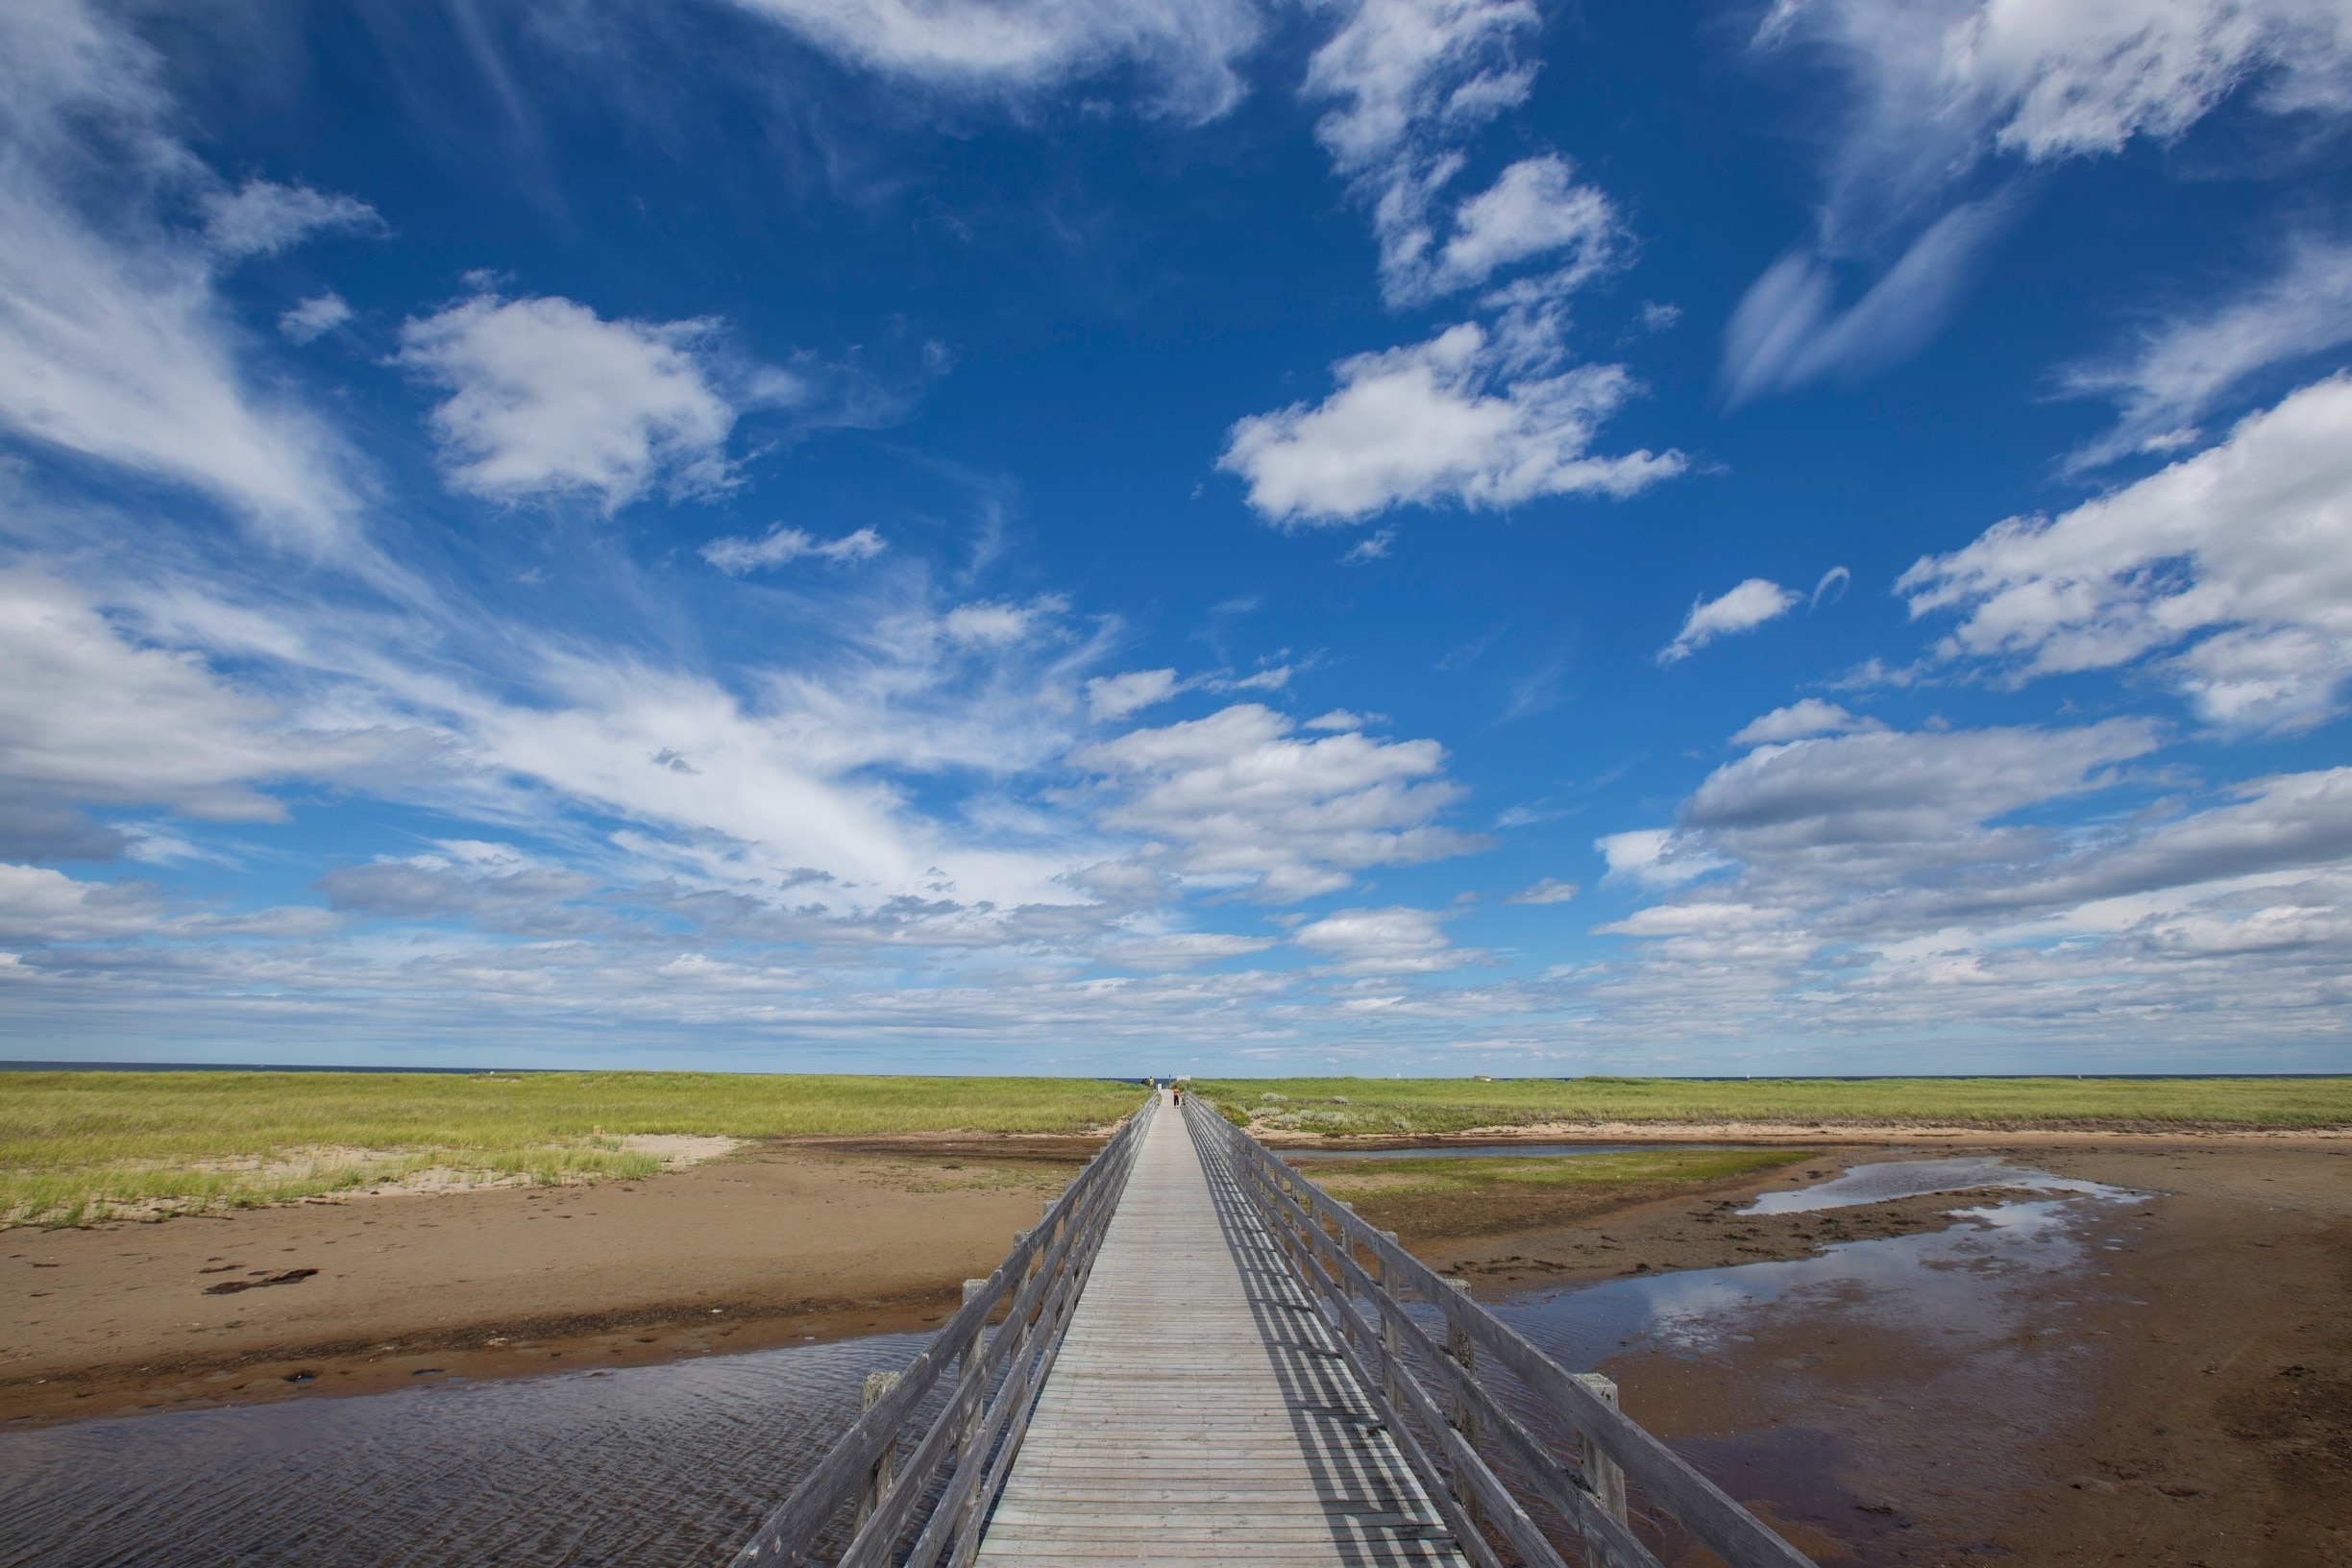 With a long boardwalk leading to the even longer Kelly's Beach, this National Park offers all the greens and blues you need to enjoy a perfect summer day.